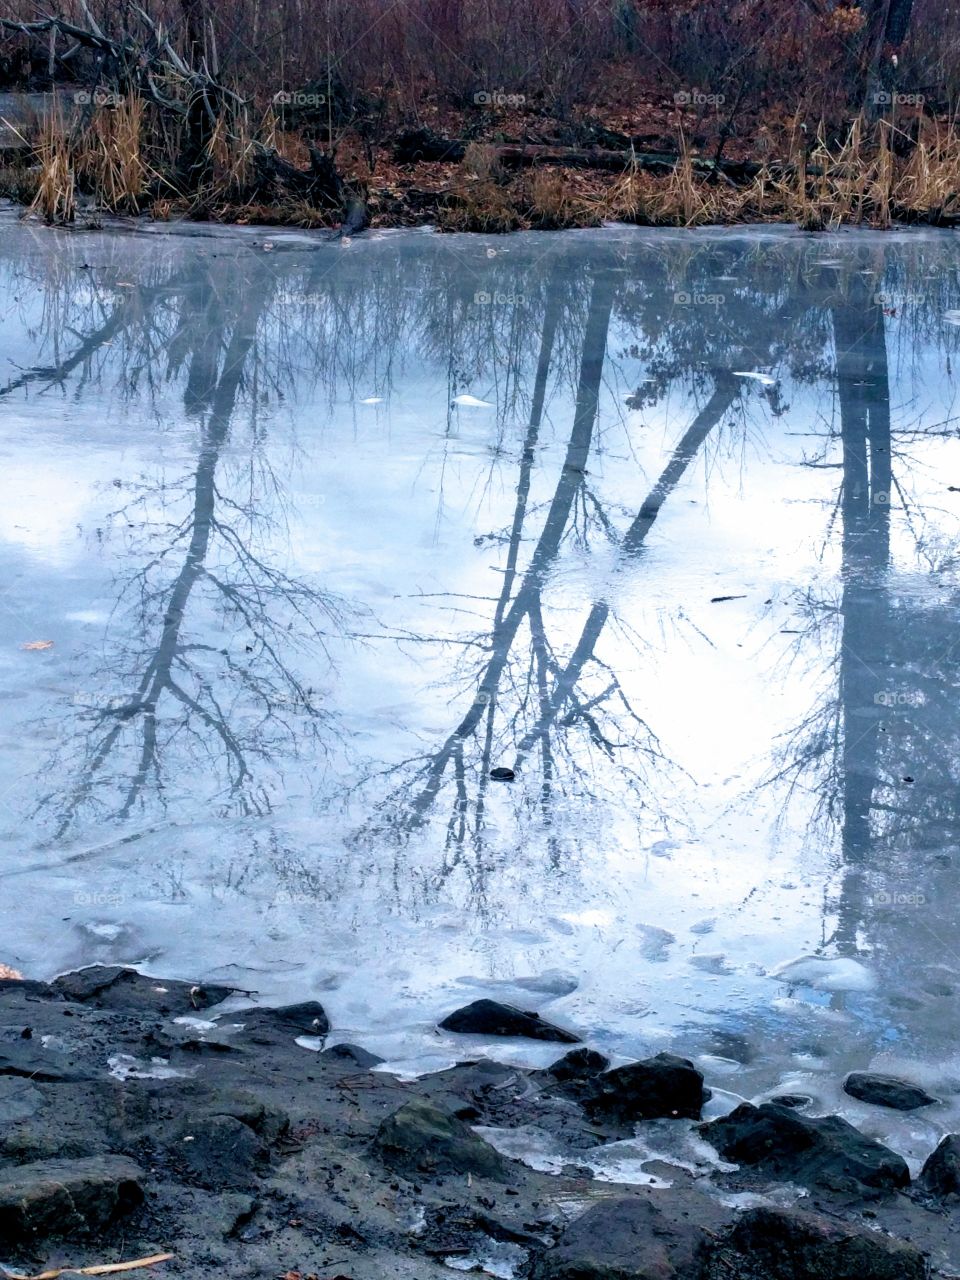 Winter trees mirrored in the pond